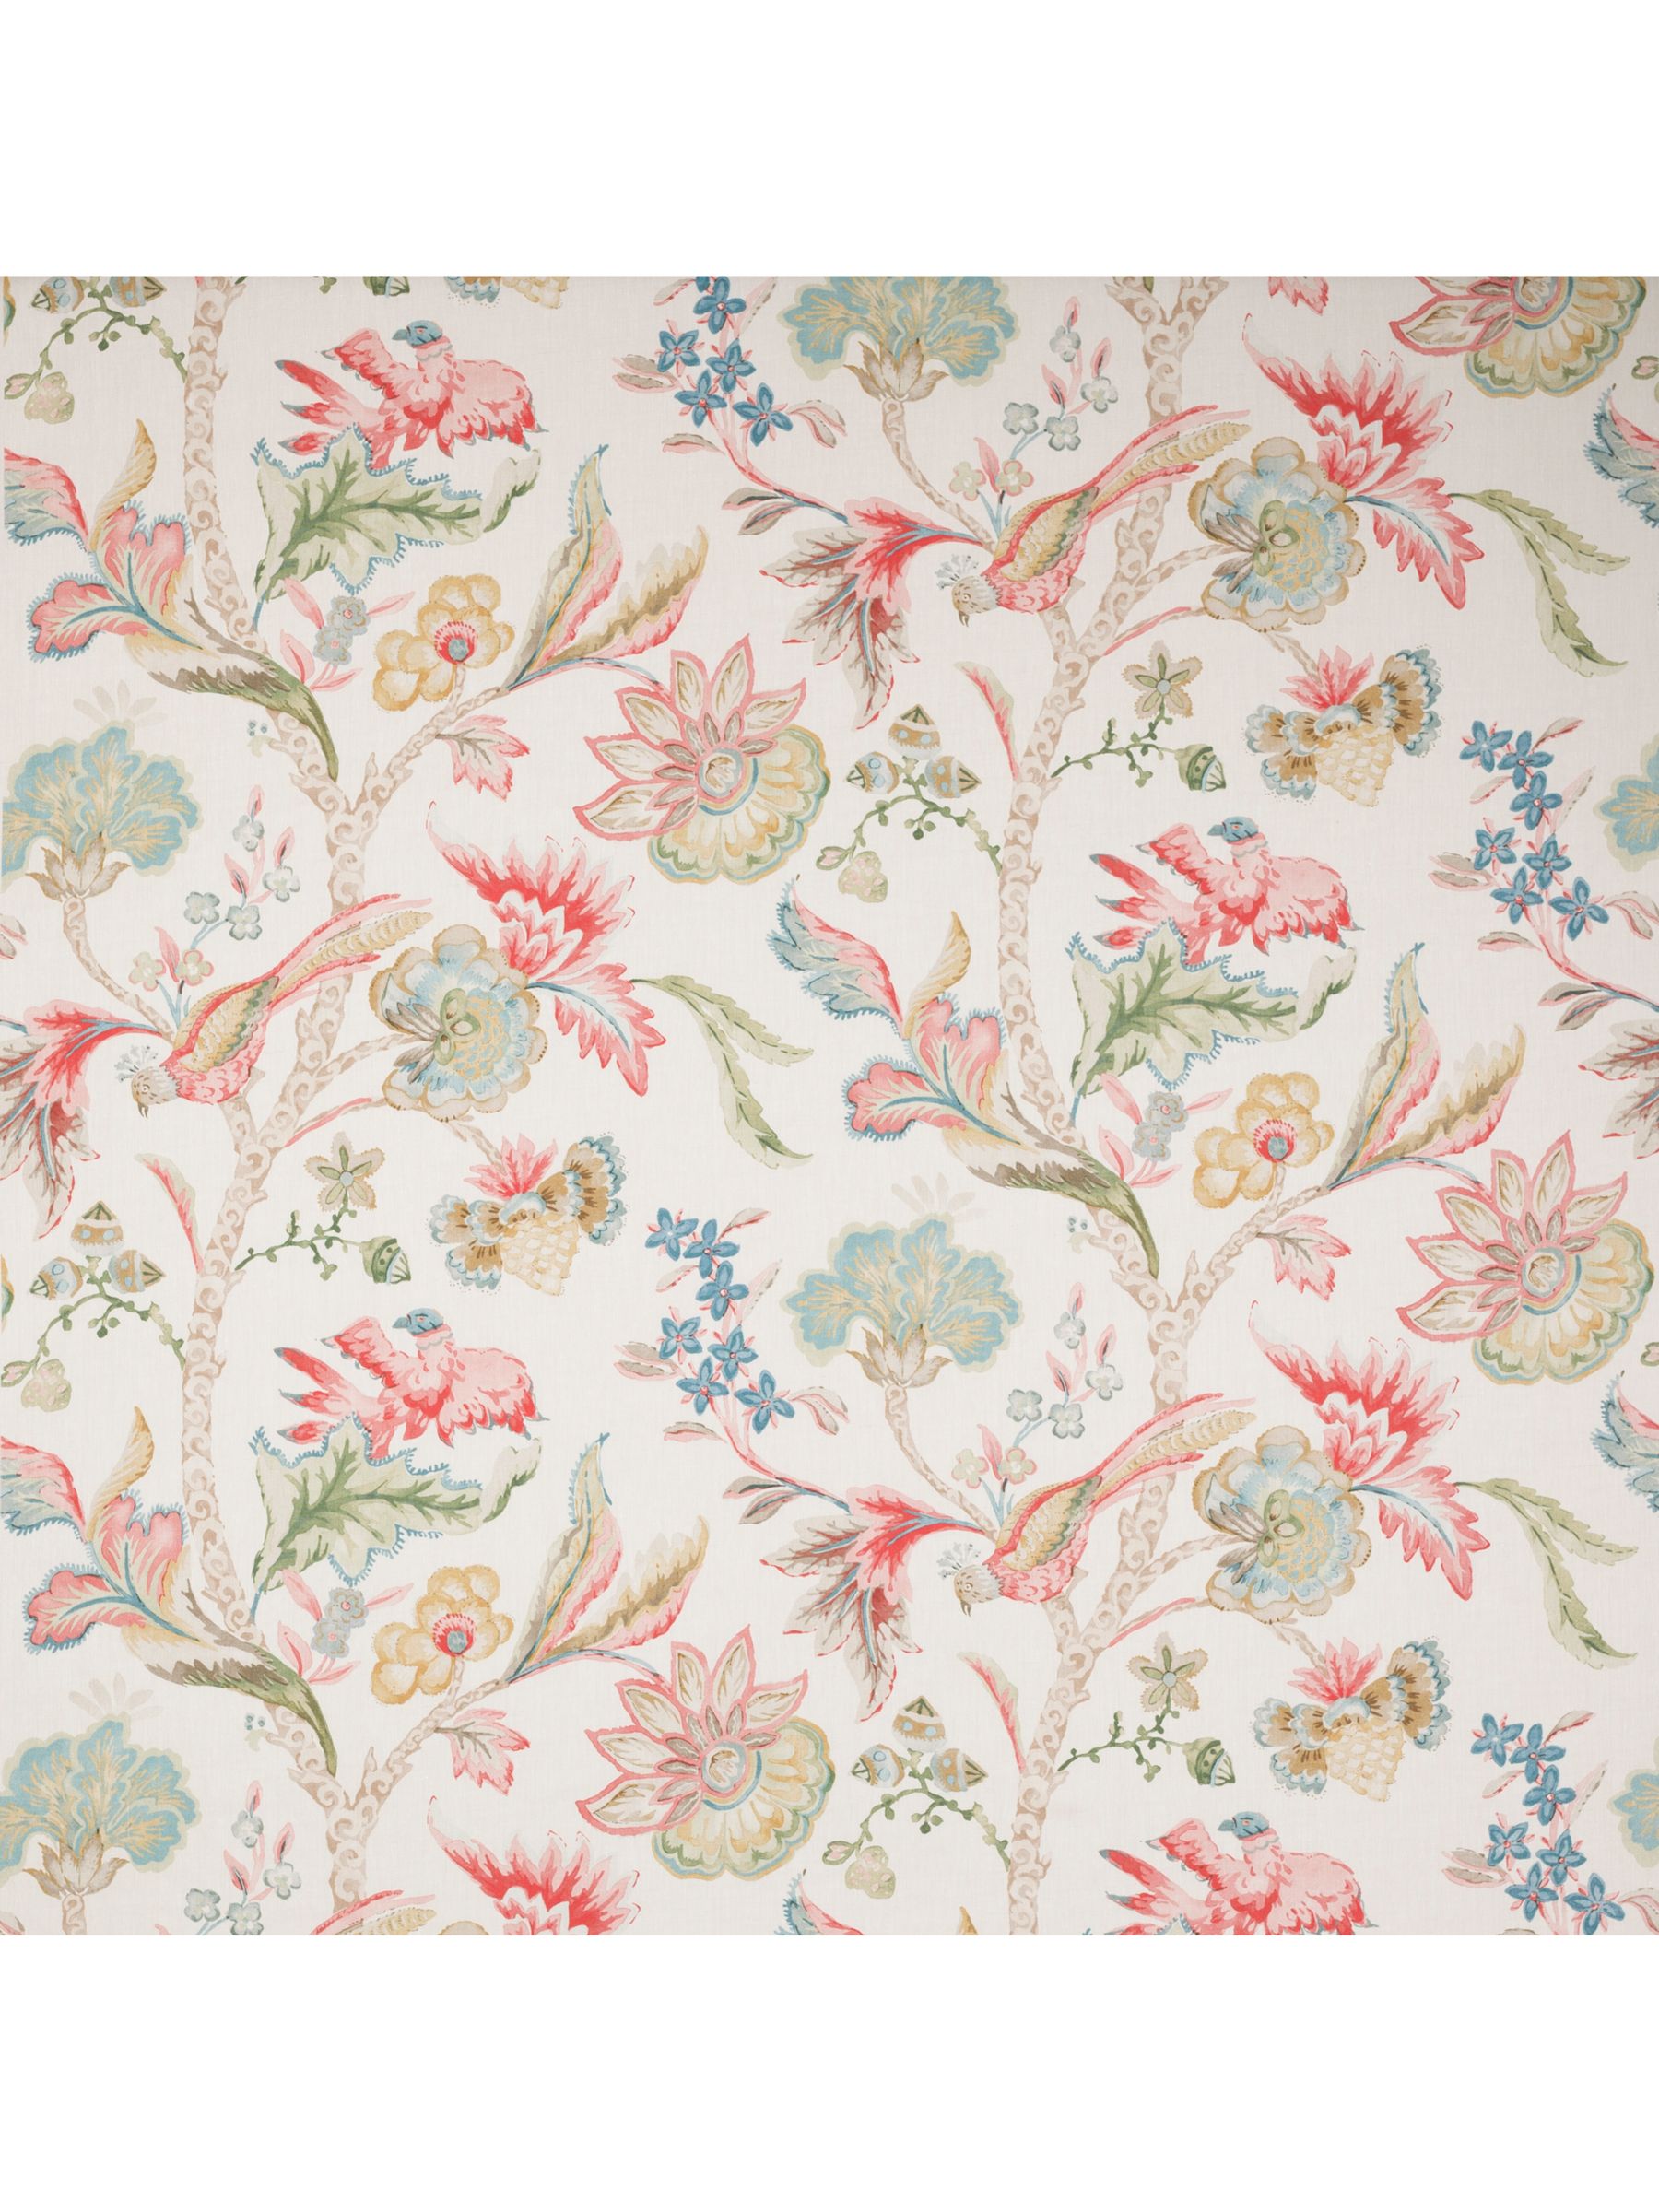 Colefax and Fowler Belvedere Furnishing Fabric, Pink/Green